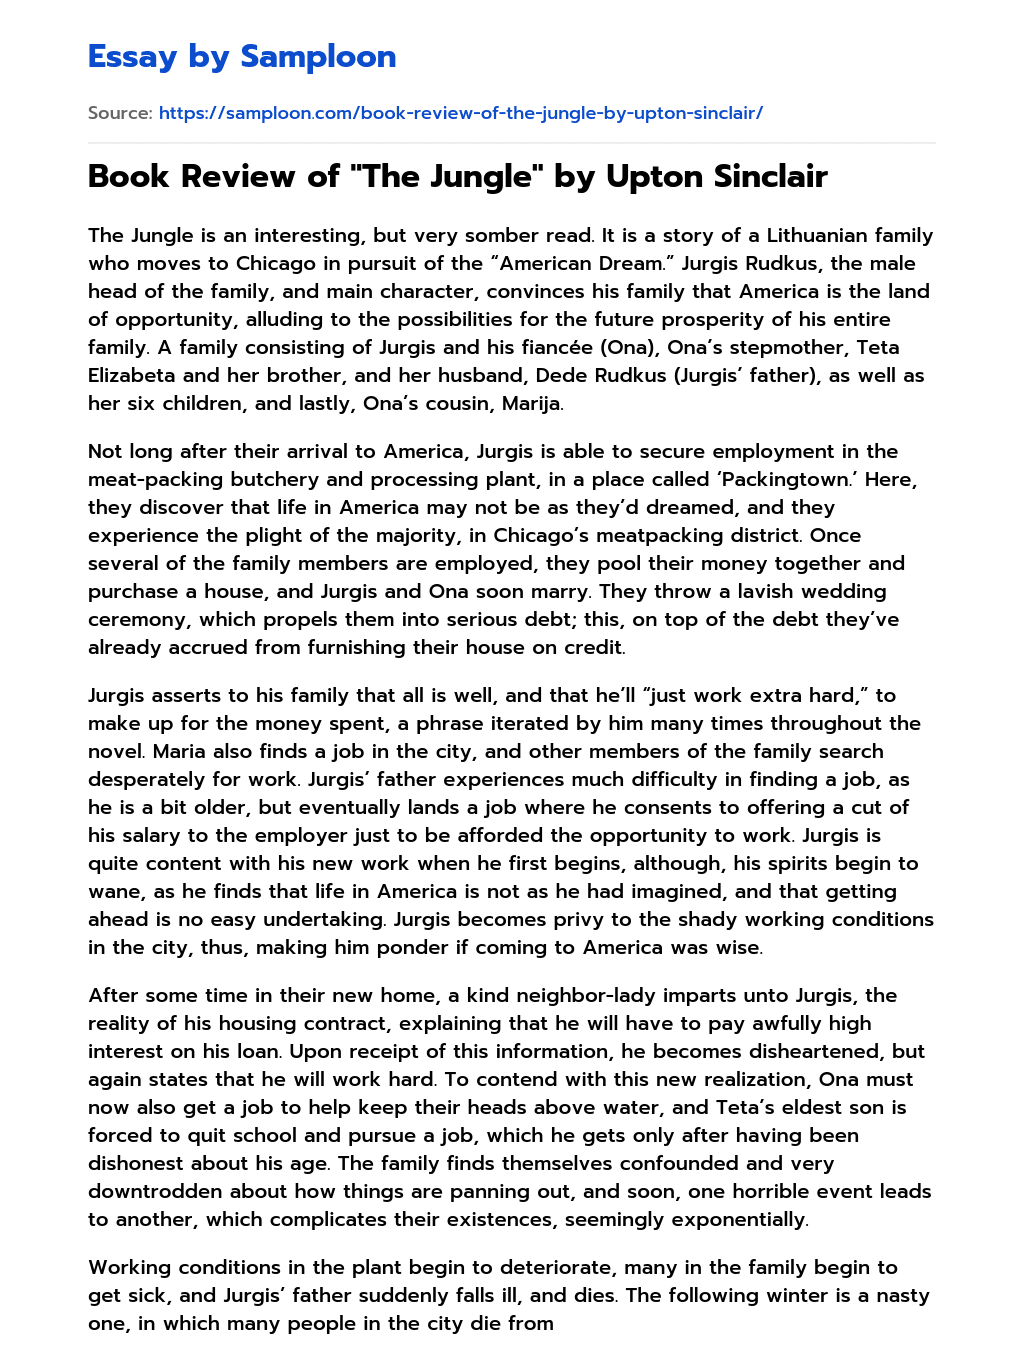 Book Review of “The Jungle” by Upton Sinclair essay